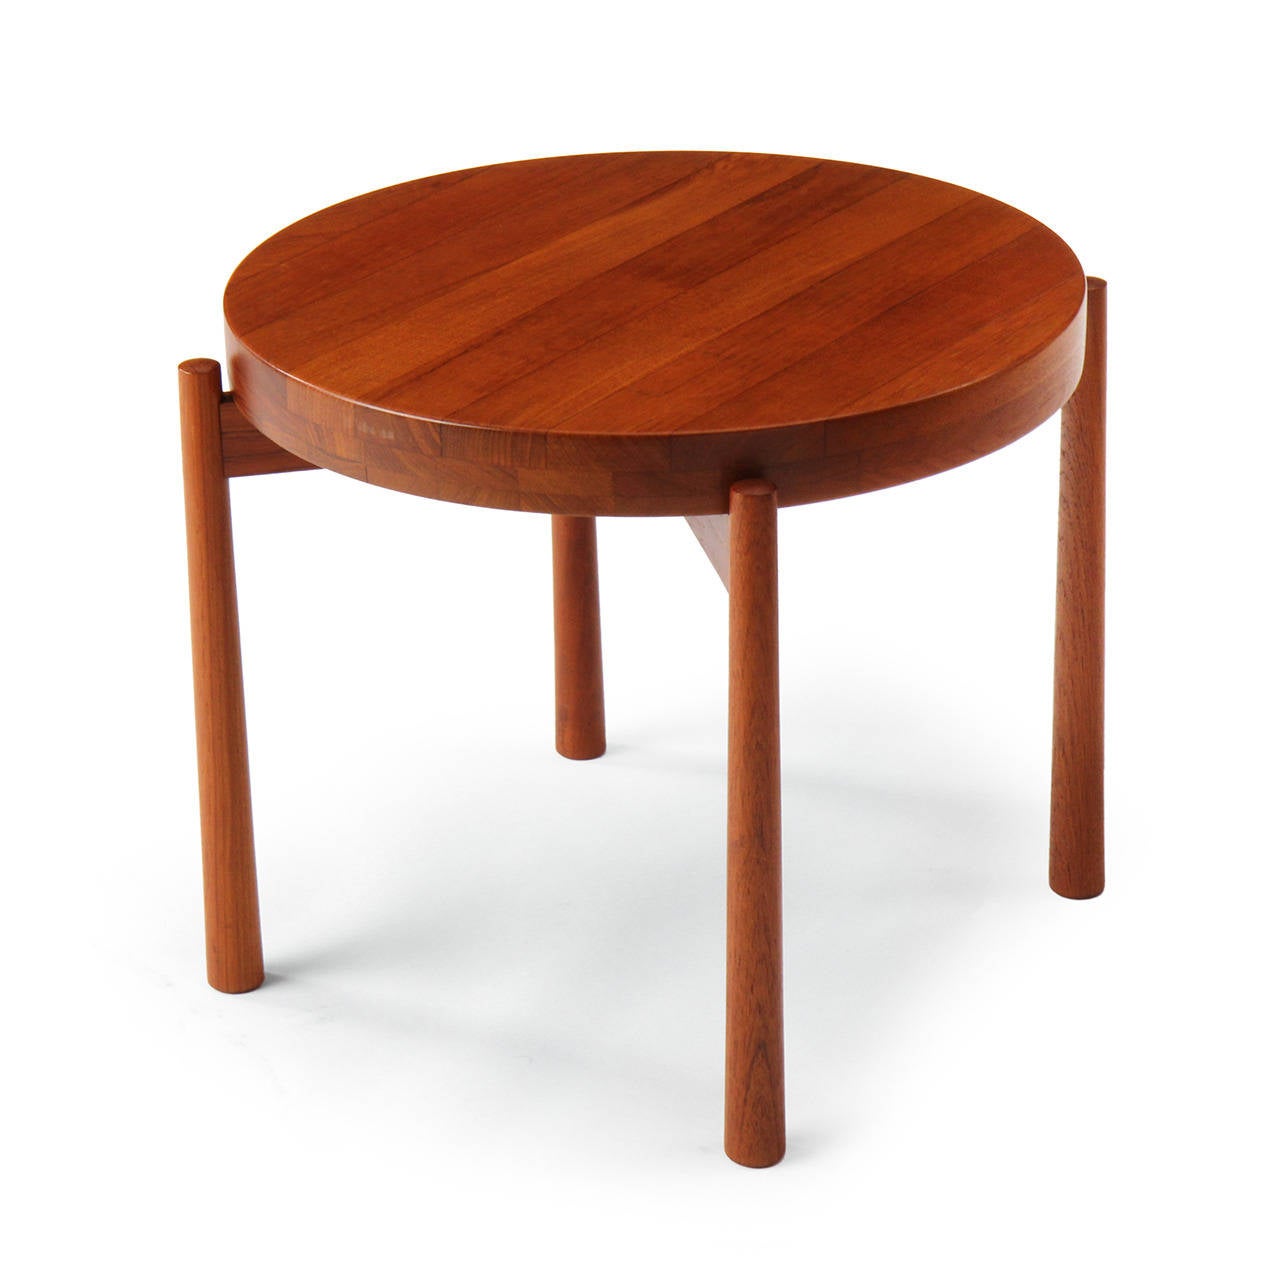 1960s Danish Modern Tray Table by Jens Quistgaard for Richard Nissen For Sale 2